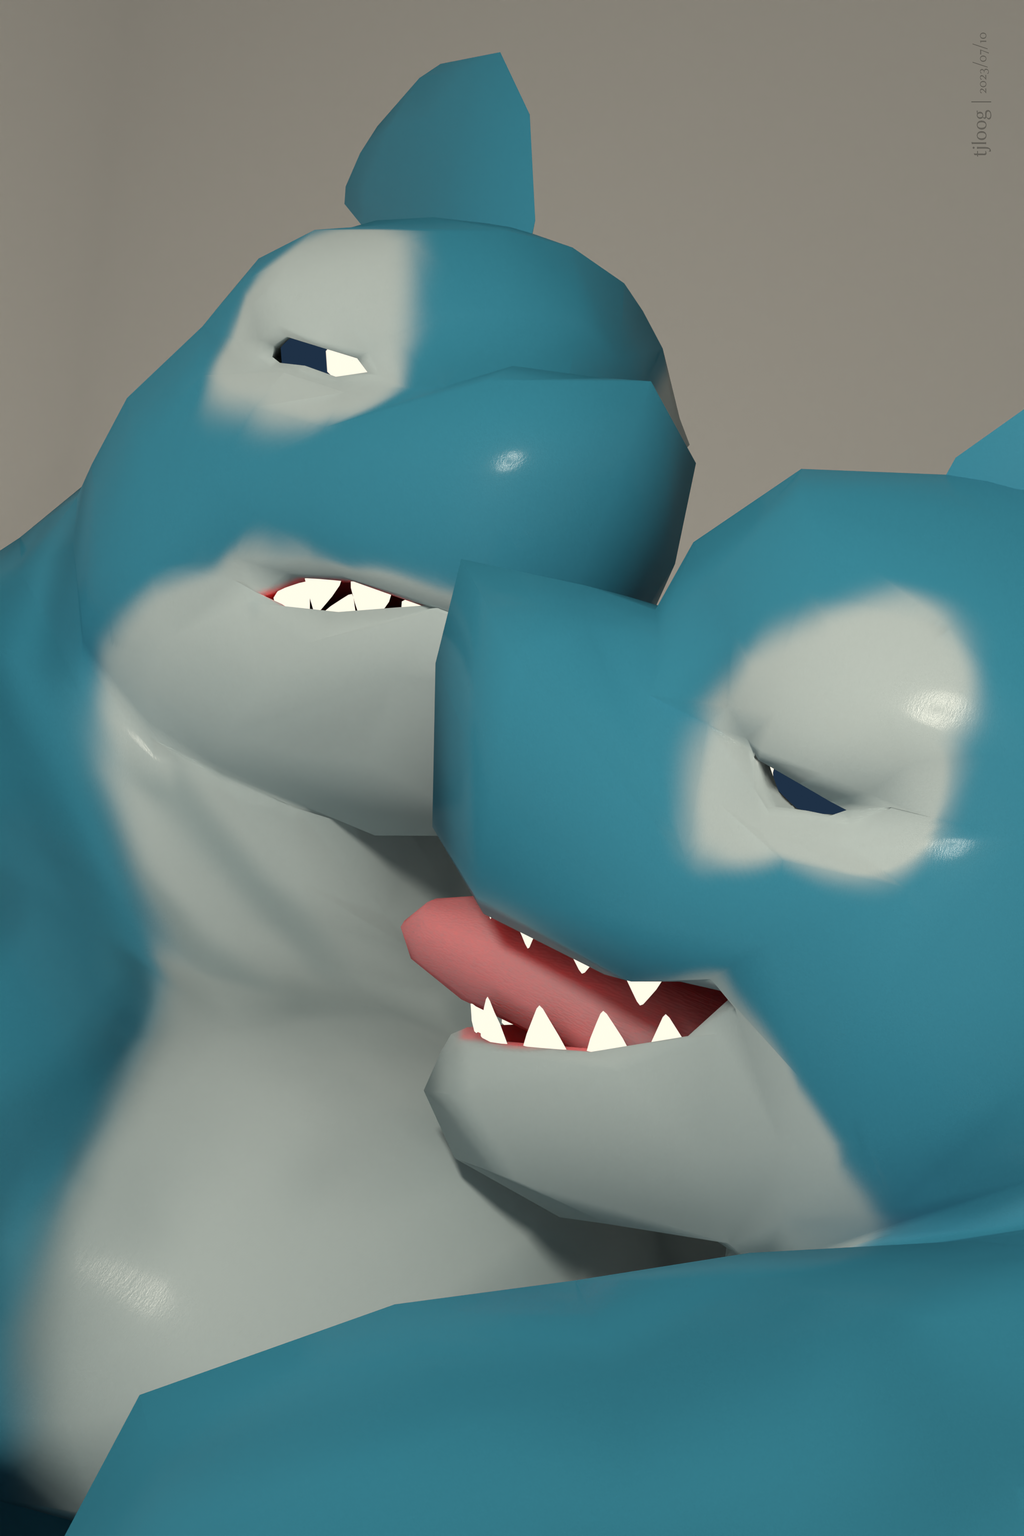 Most recent image: Low-Poly 3D Experiment #3: Bara Wake Spreads Himself (6)